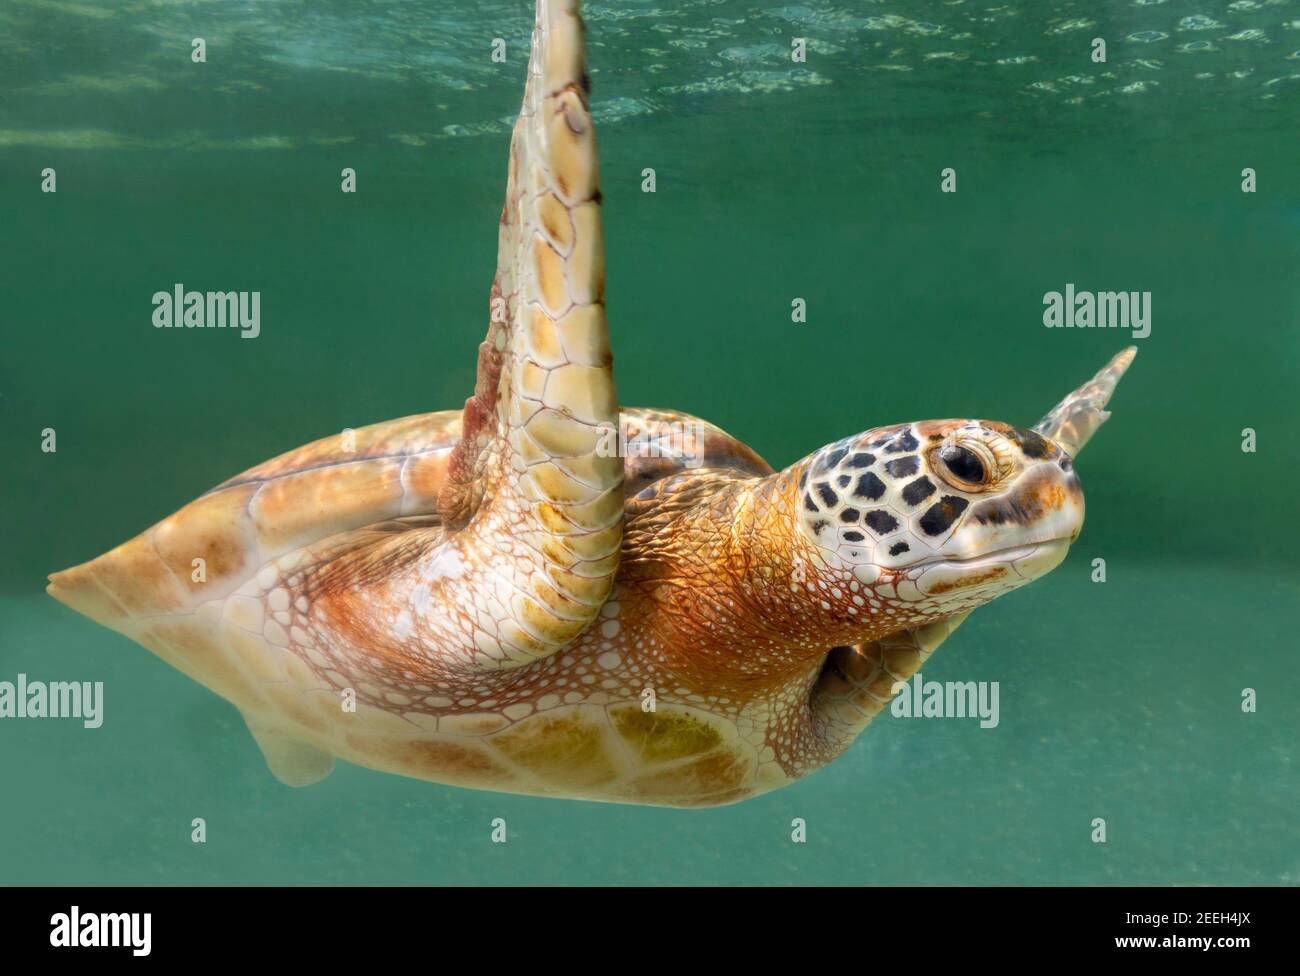 Close-up view of a Green Sea turtle (Chelonia mydas) Stock Photo